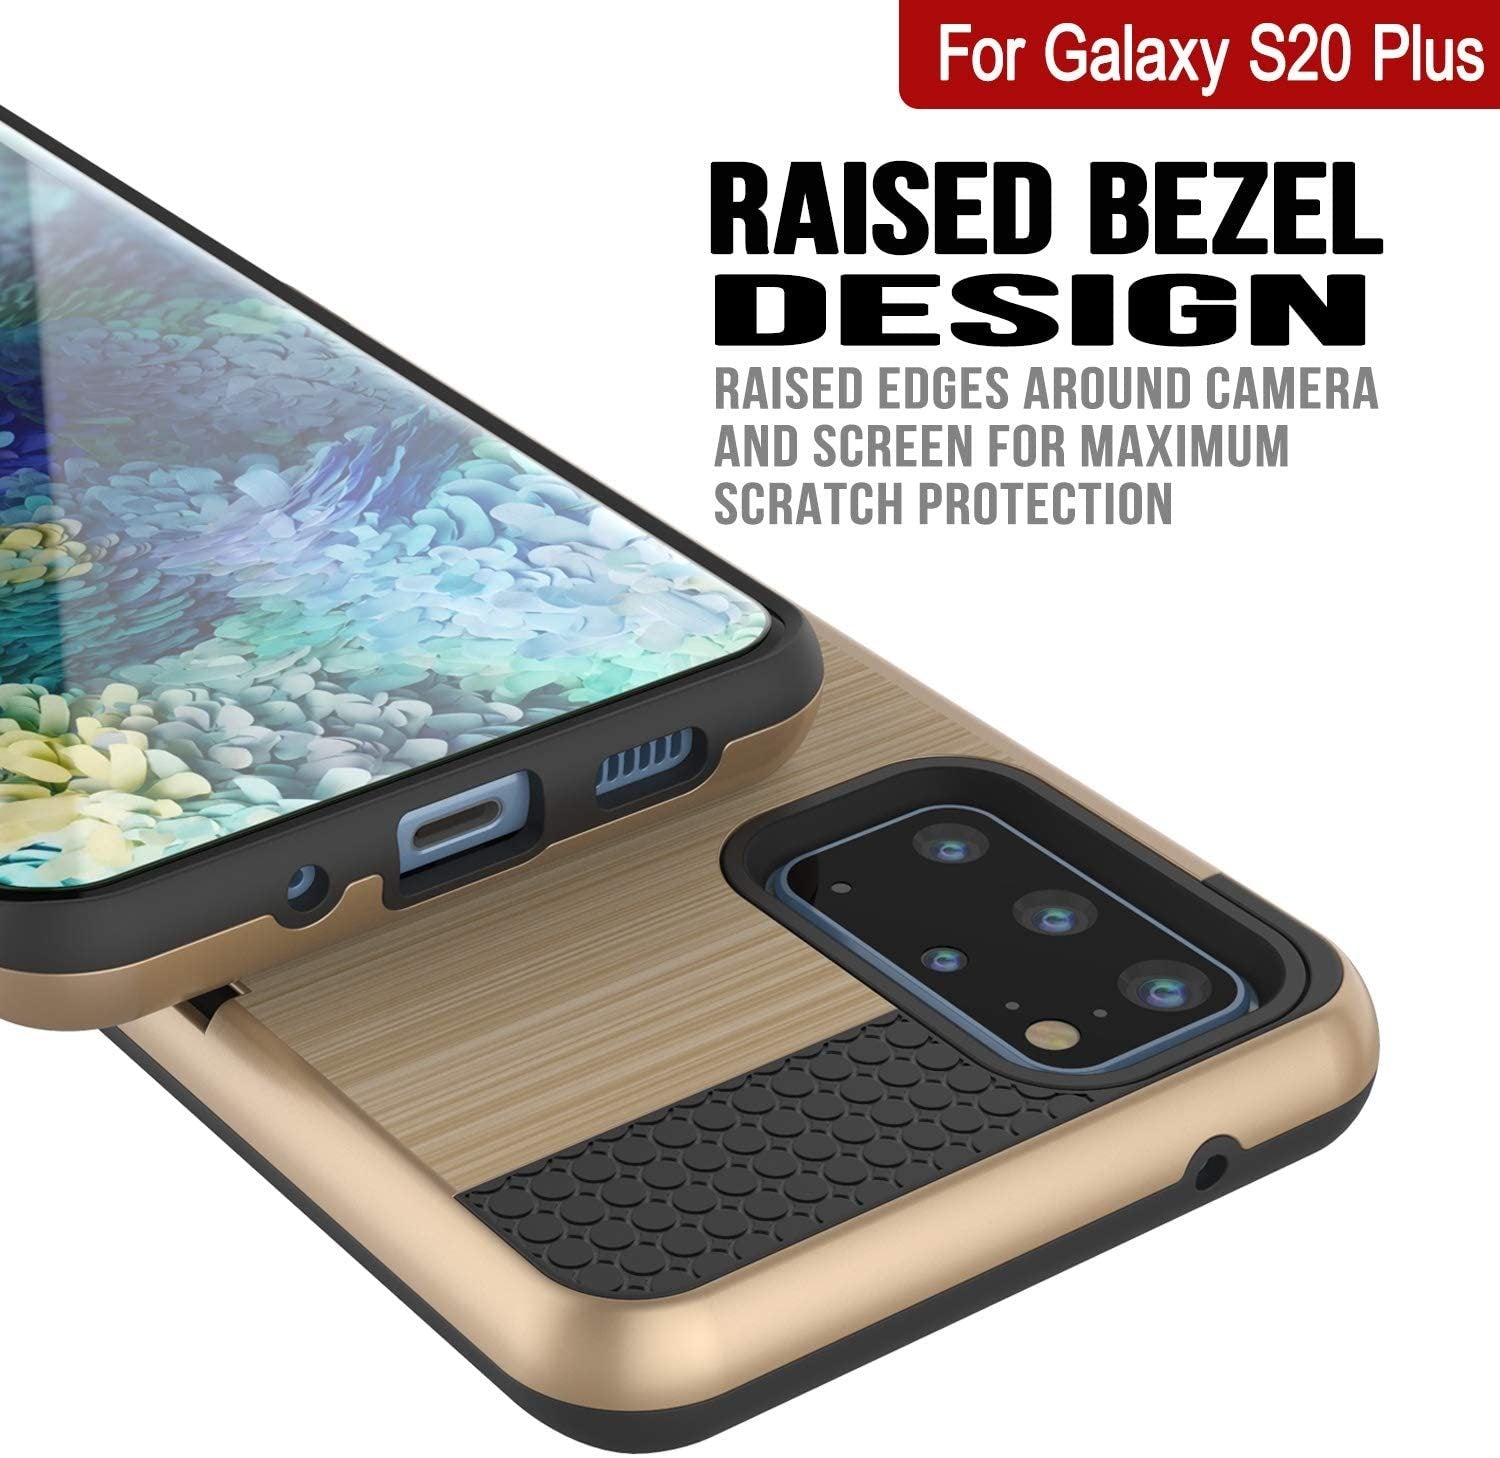 Galaxy S20+ Plus  Case, PUNKcase [SLOT Series] [Slim Fit] Dual-Layer Armor Cover w/Integrated Anti-Shock System, Credit Card Slot [Gold]